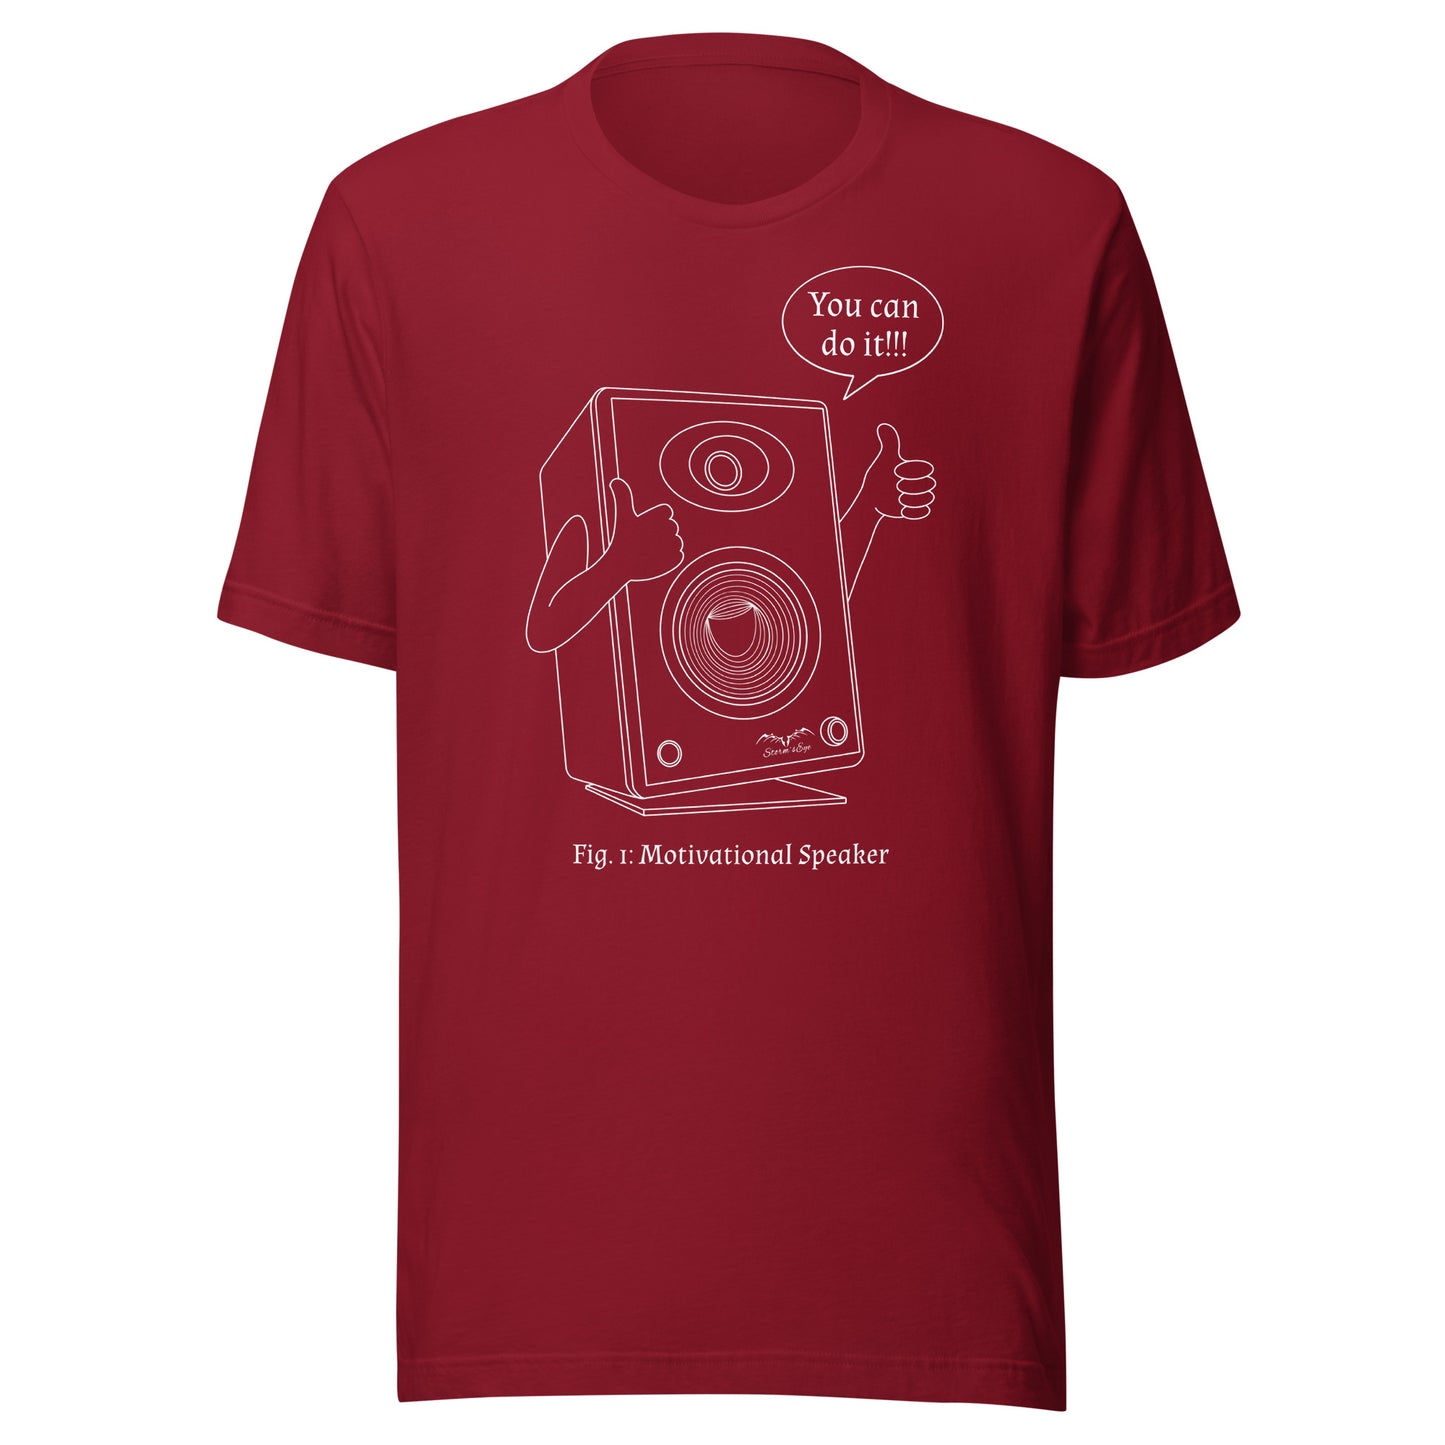 funny motivational speaker t-shirt, red, by Stormseye Design